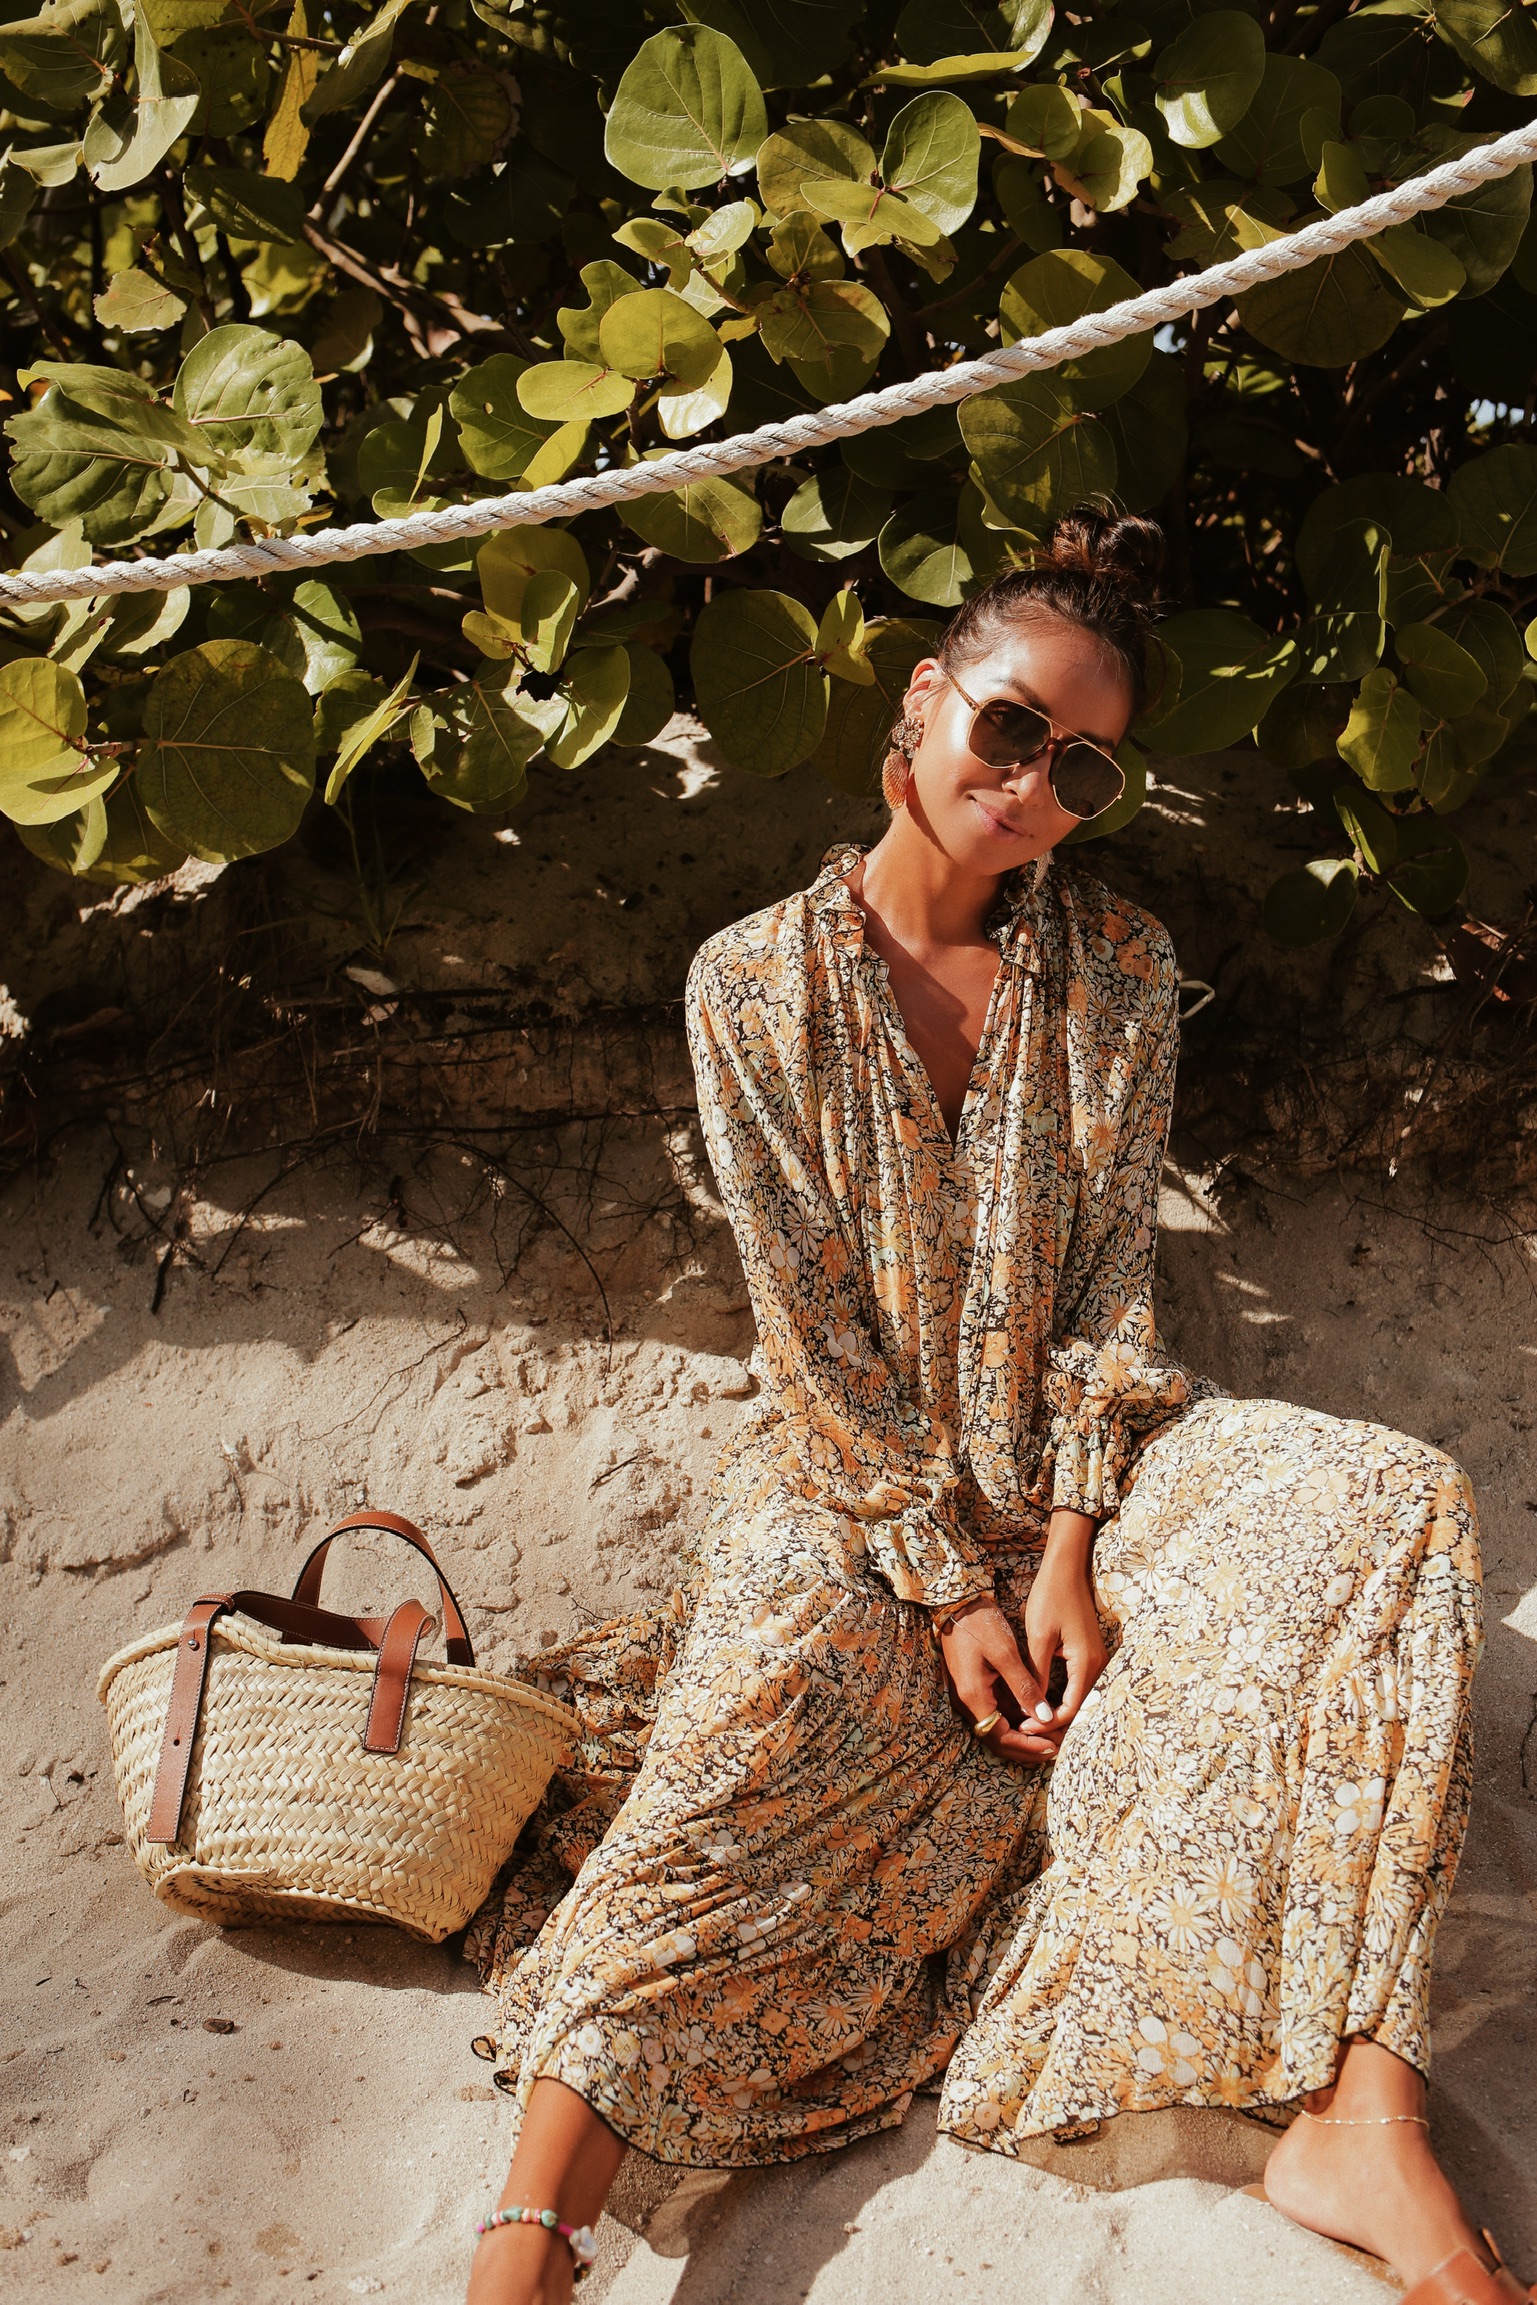 Miami, Maxi’s Dresses and Floral Prints – Sincerely Jules